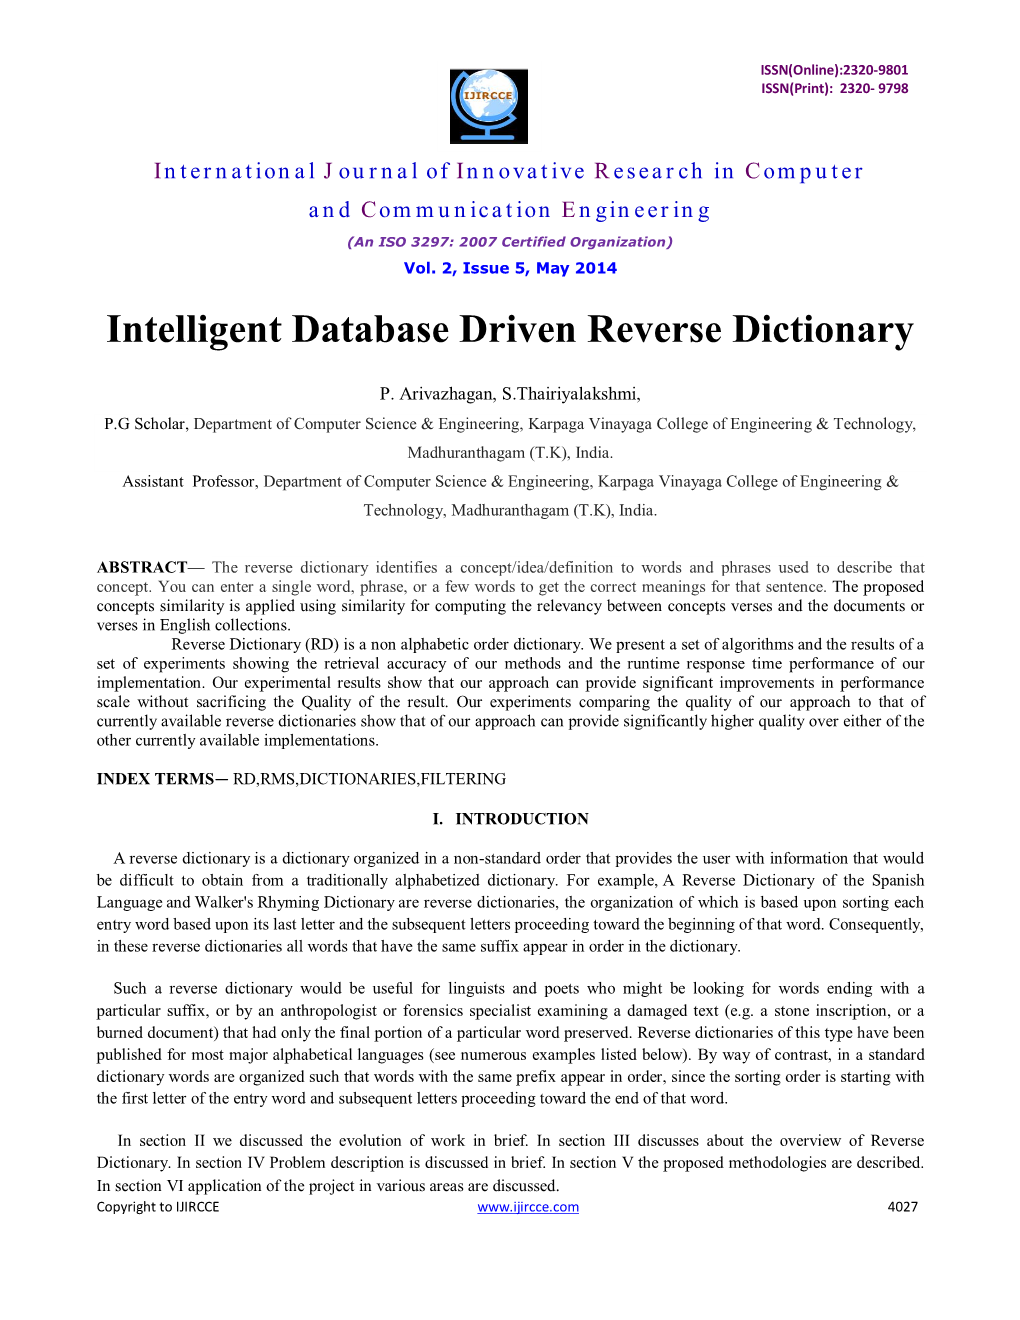 Intelligent Database Driven Reverse Dictionary